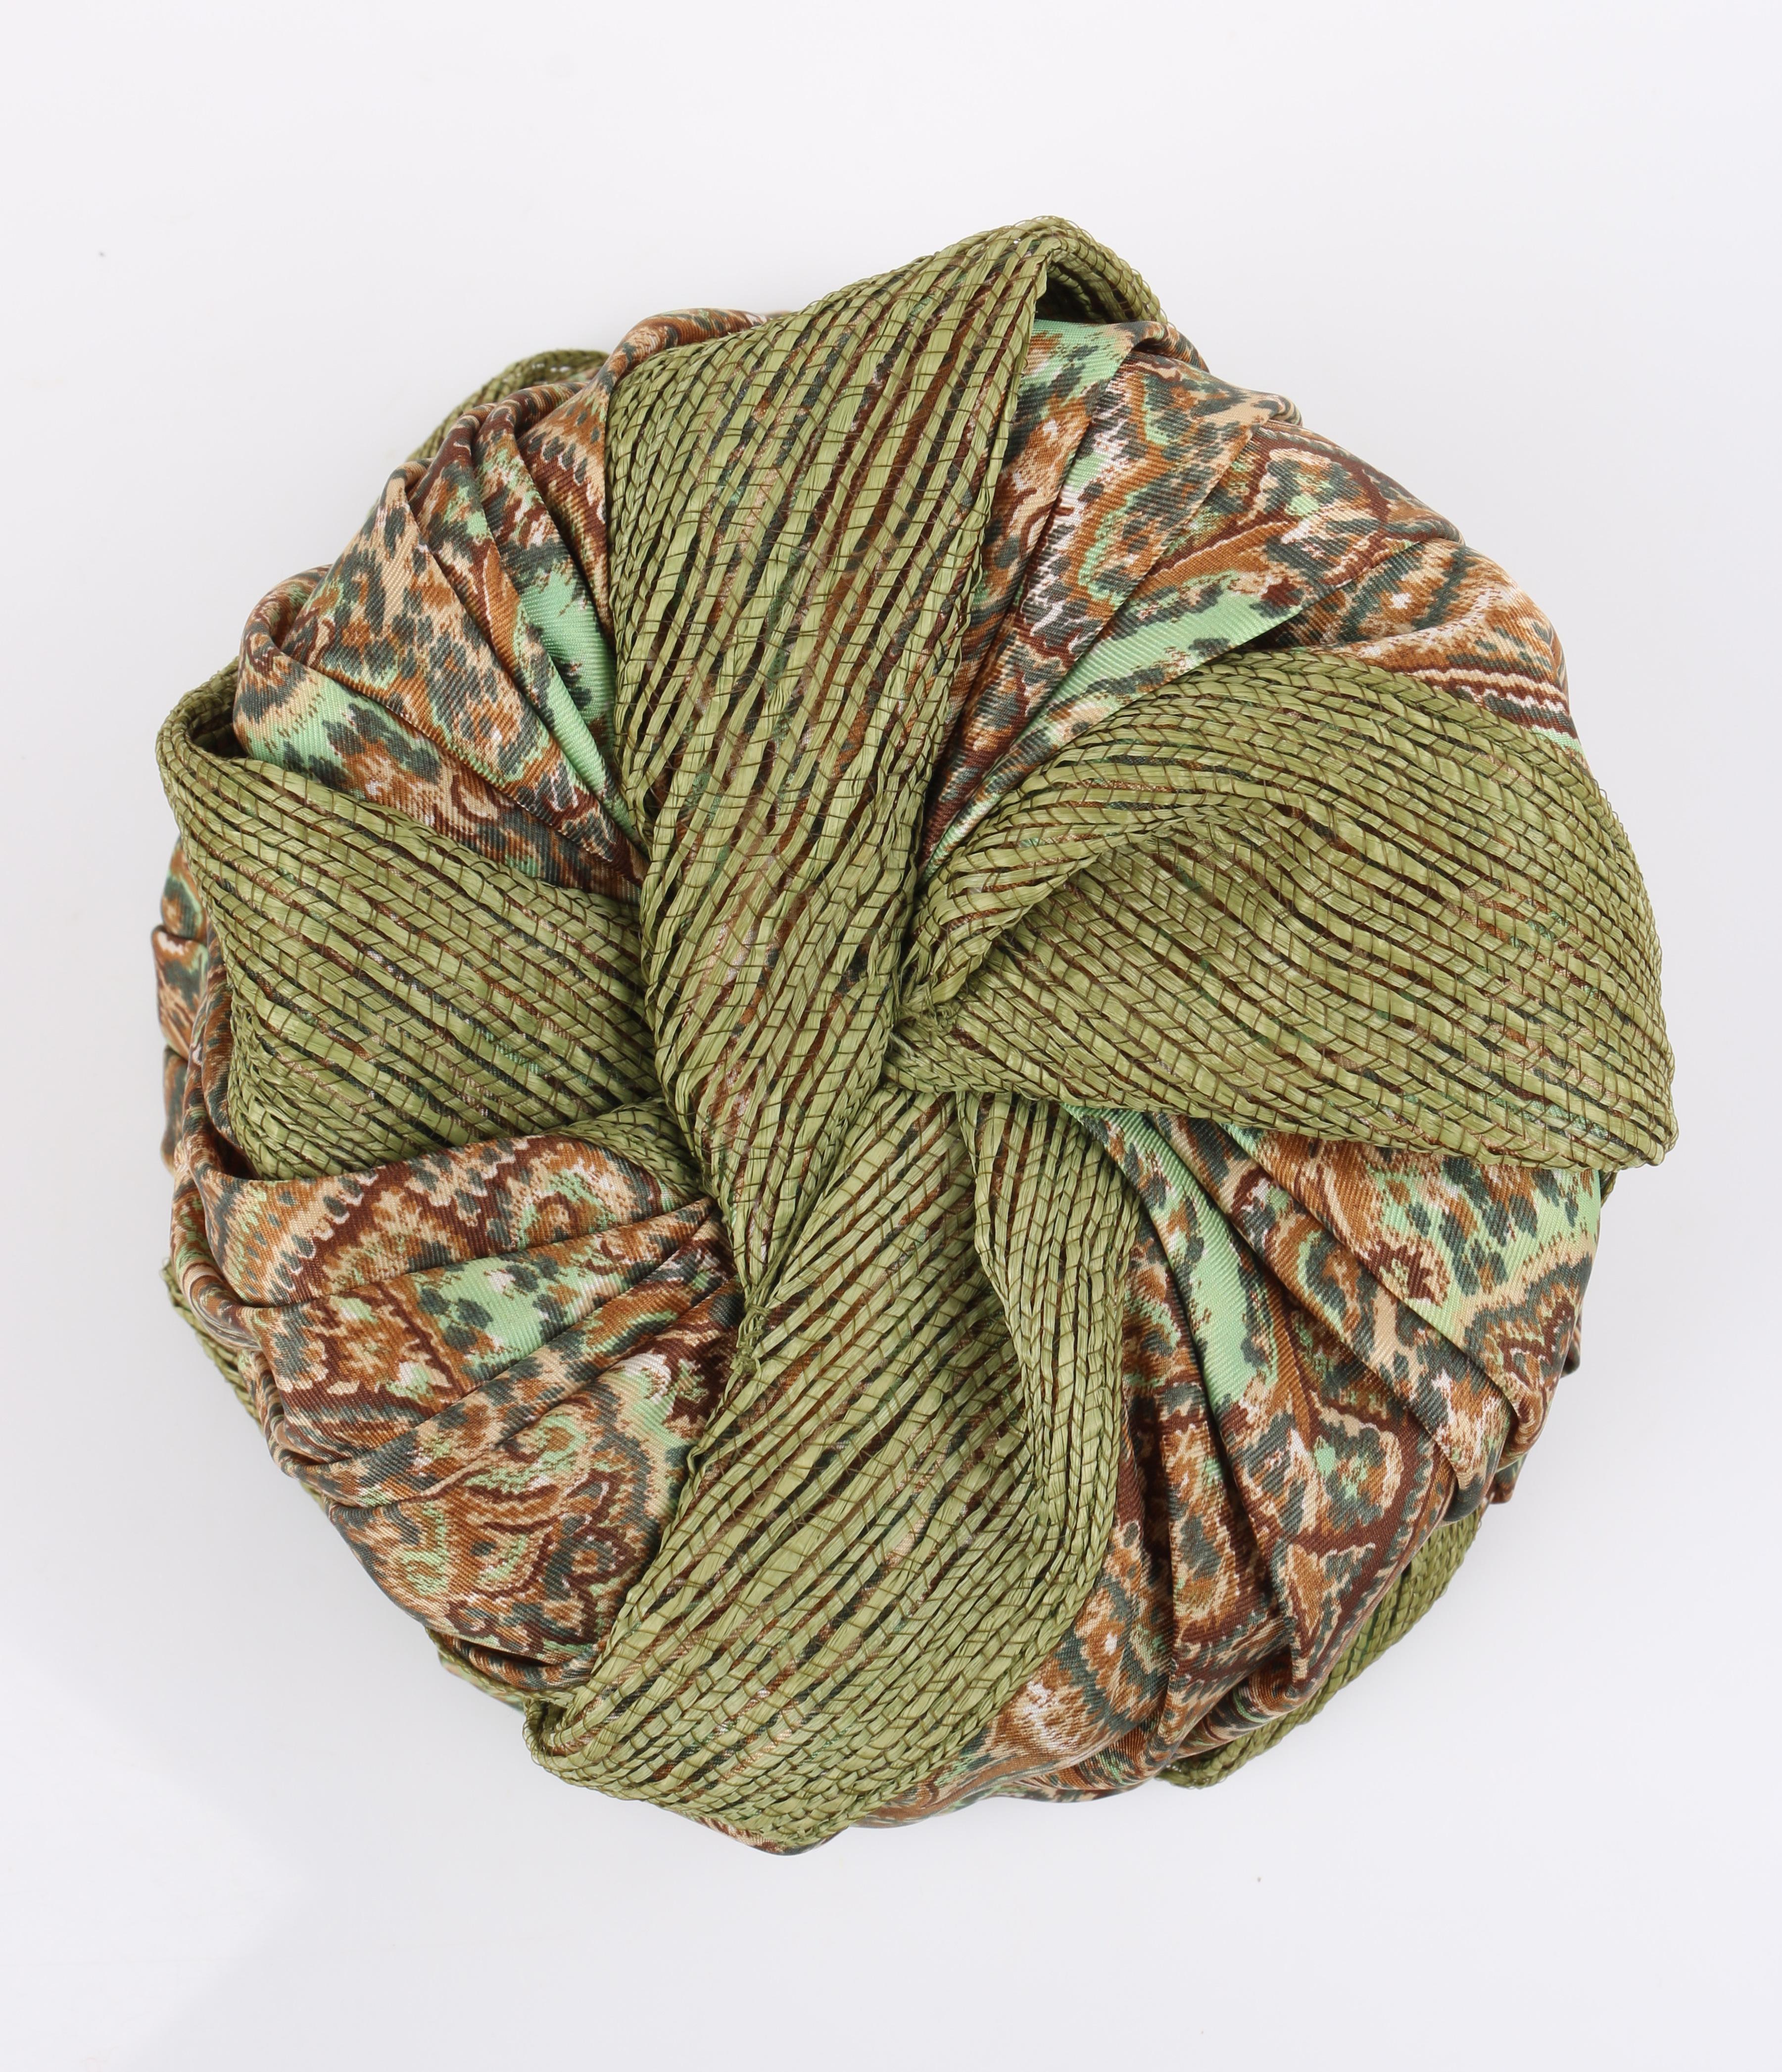 Women's Miss Dior by CHRISTIAN DIOR c.1960s Green Paisley Silk & Straw Pleated Toque Hat